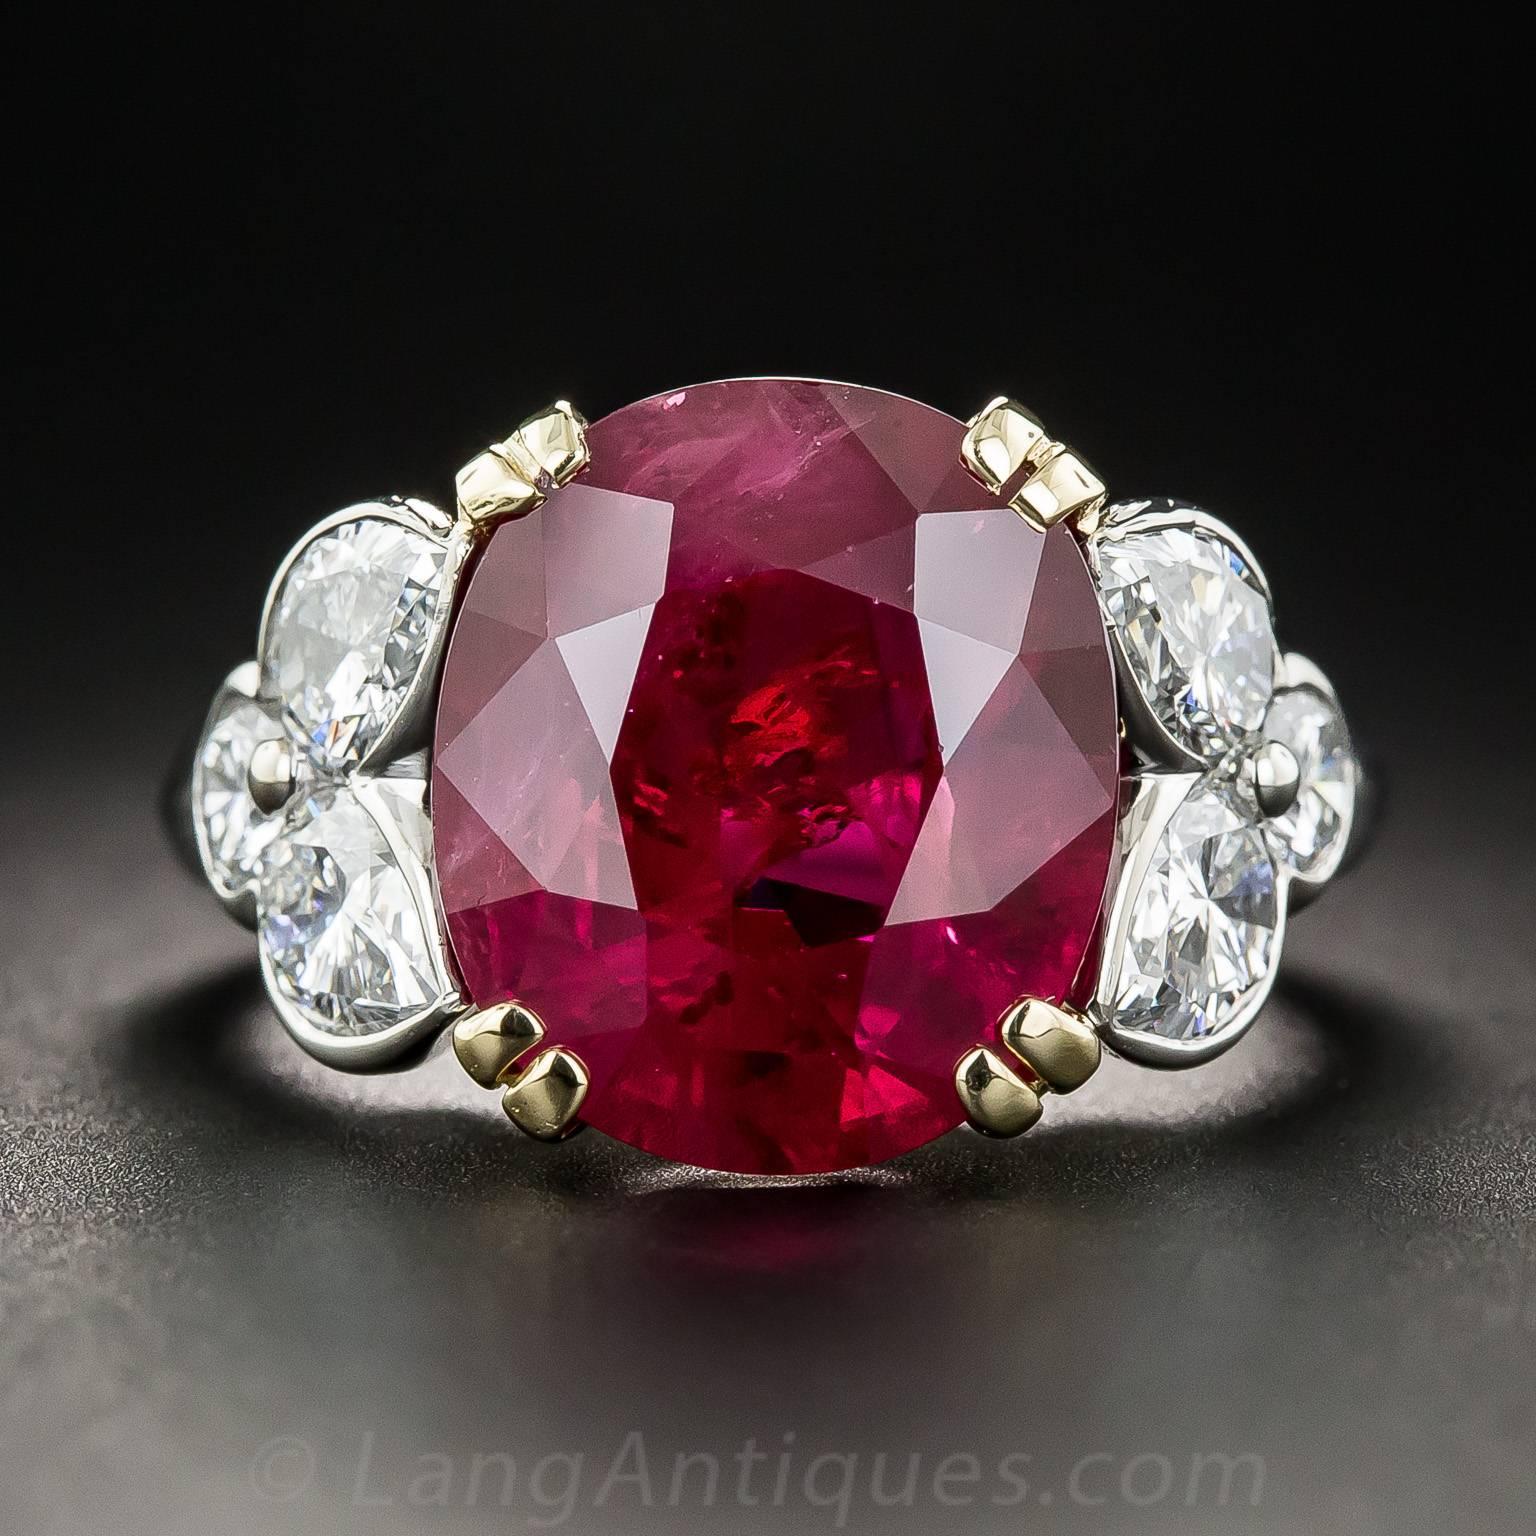 Determined to be of Siamese (Thai) origin by the GIA, one would be hard pressed to find a richer redder color in any ruby - Burmese, Madagascar, or otherwise - than this big and beautiful faceted oval gemstone weighing in at an impressive 9.15